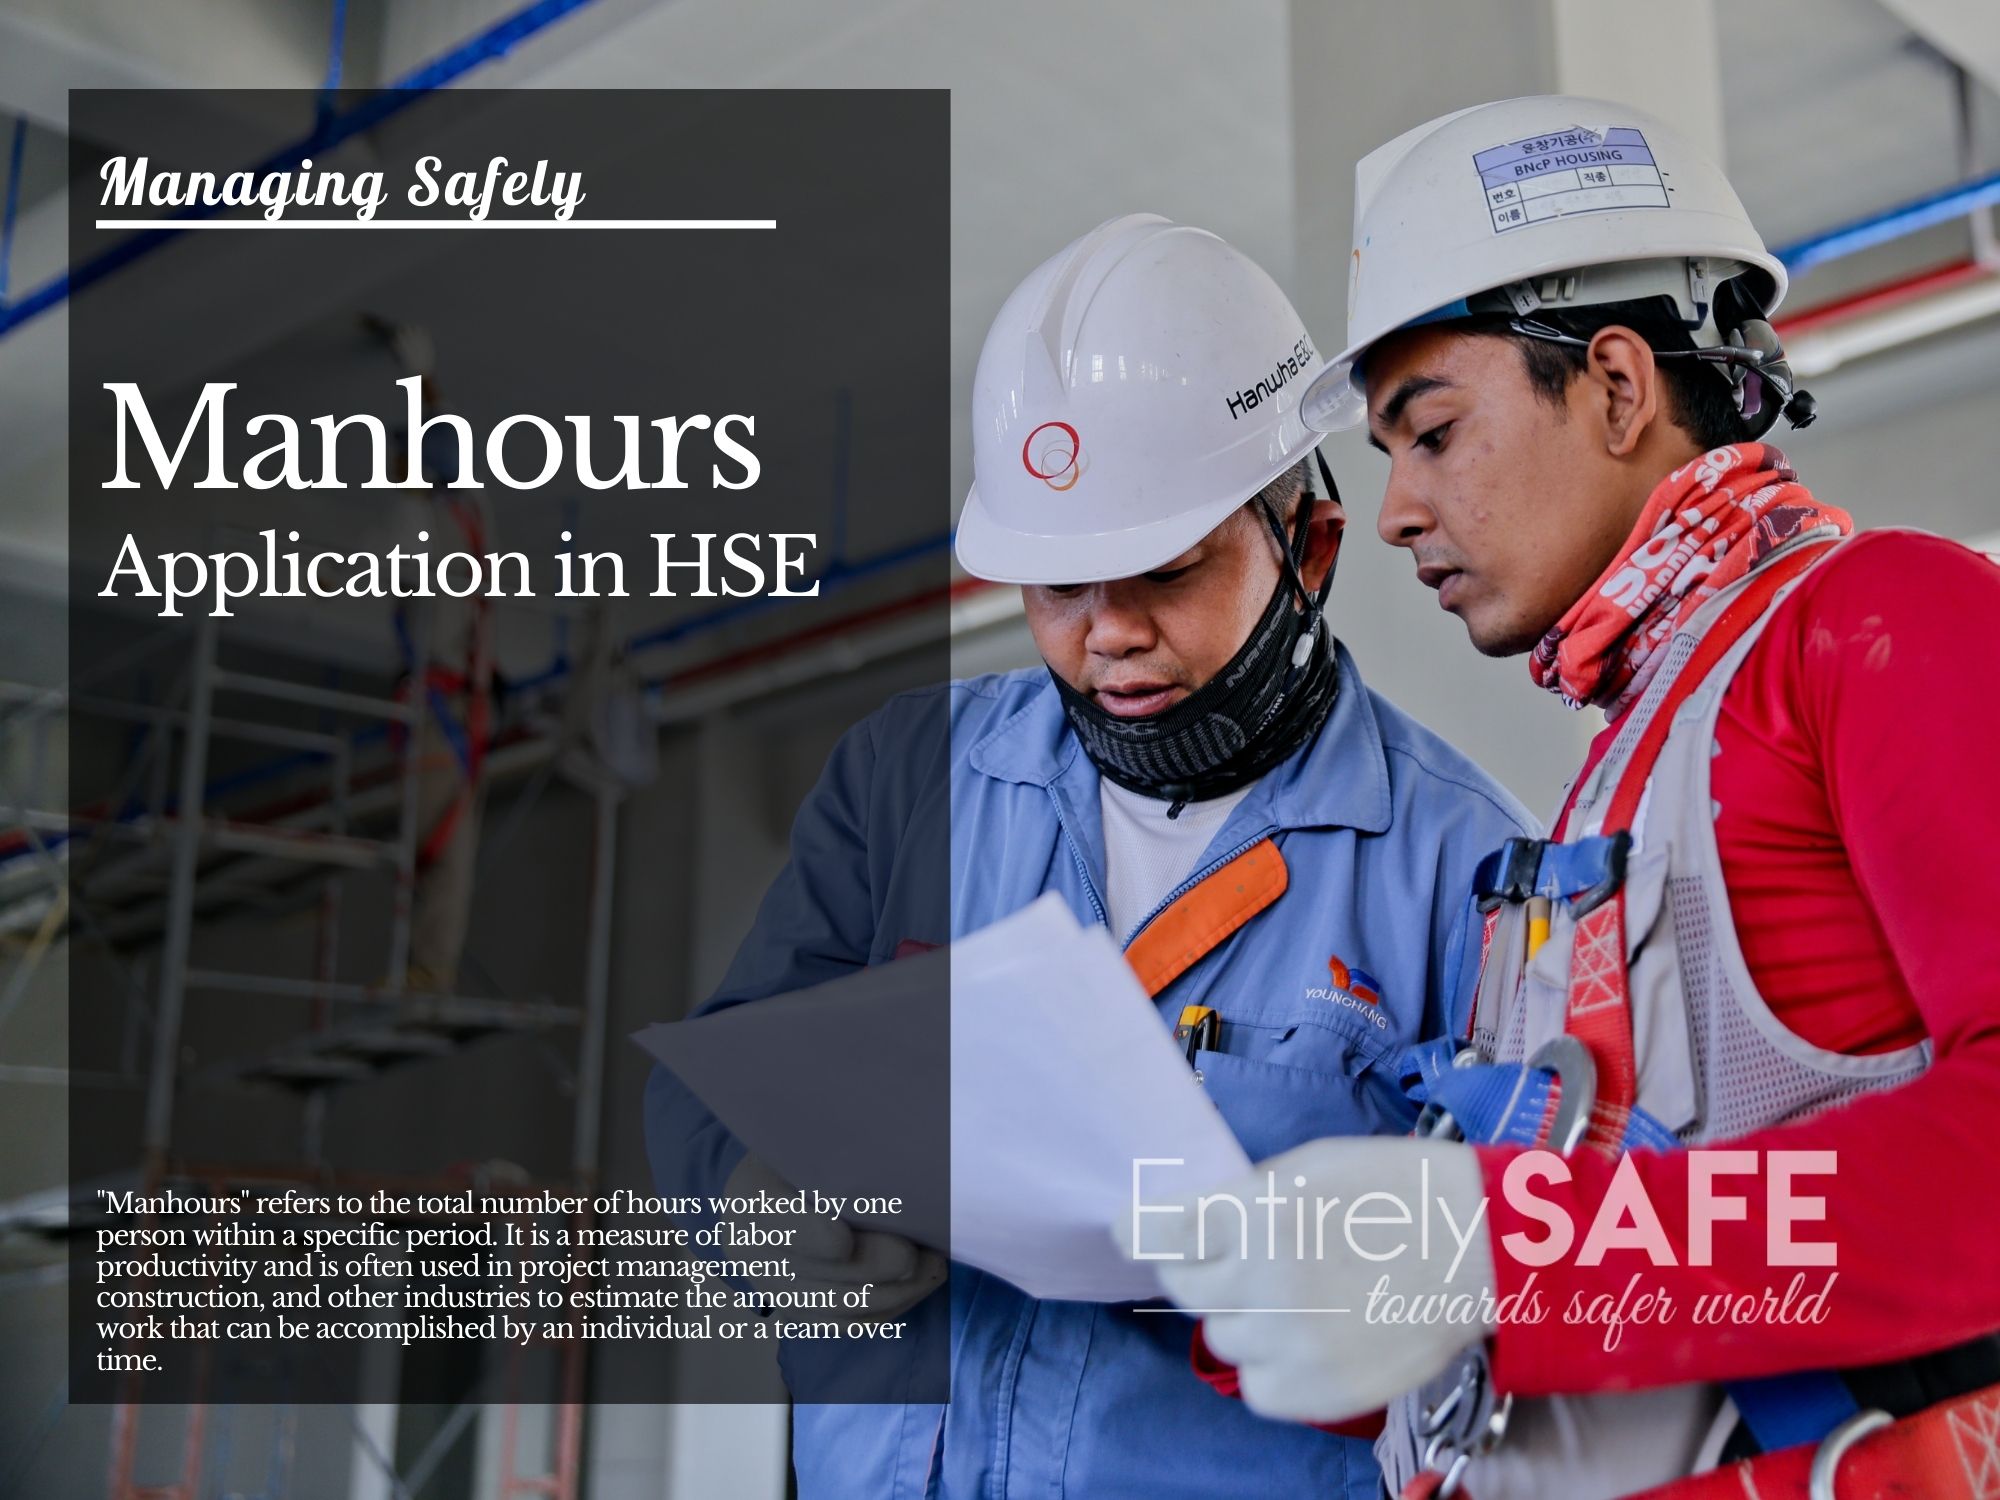 Application of Manhours in Health and Safety